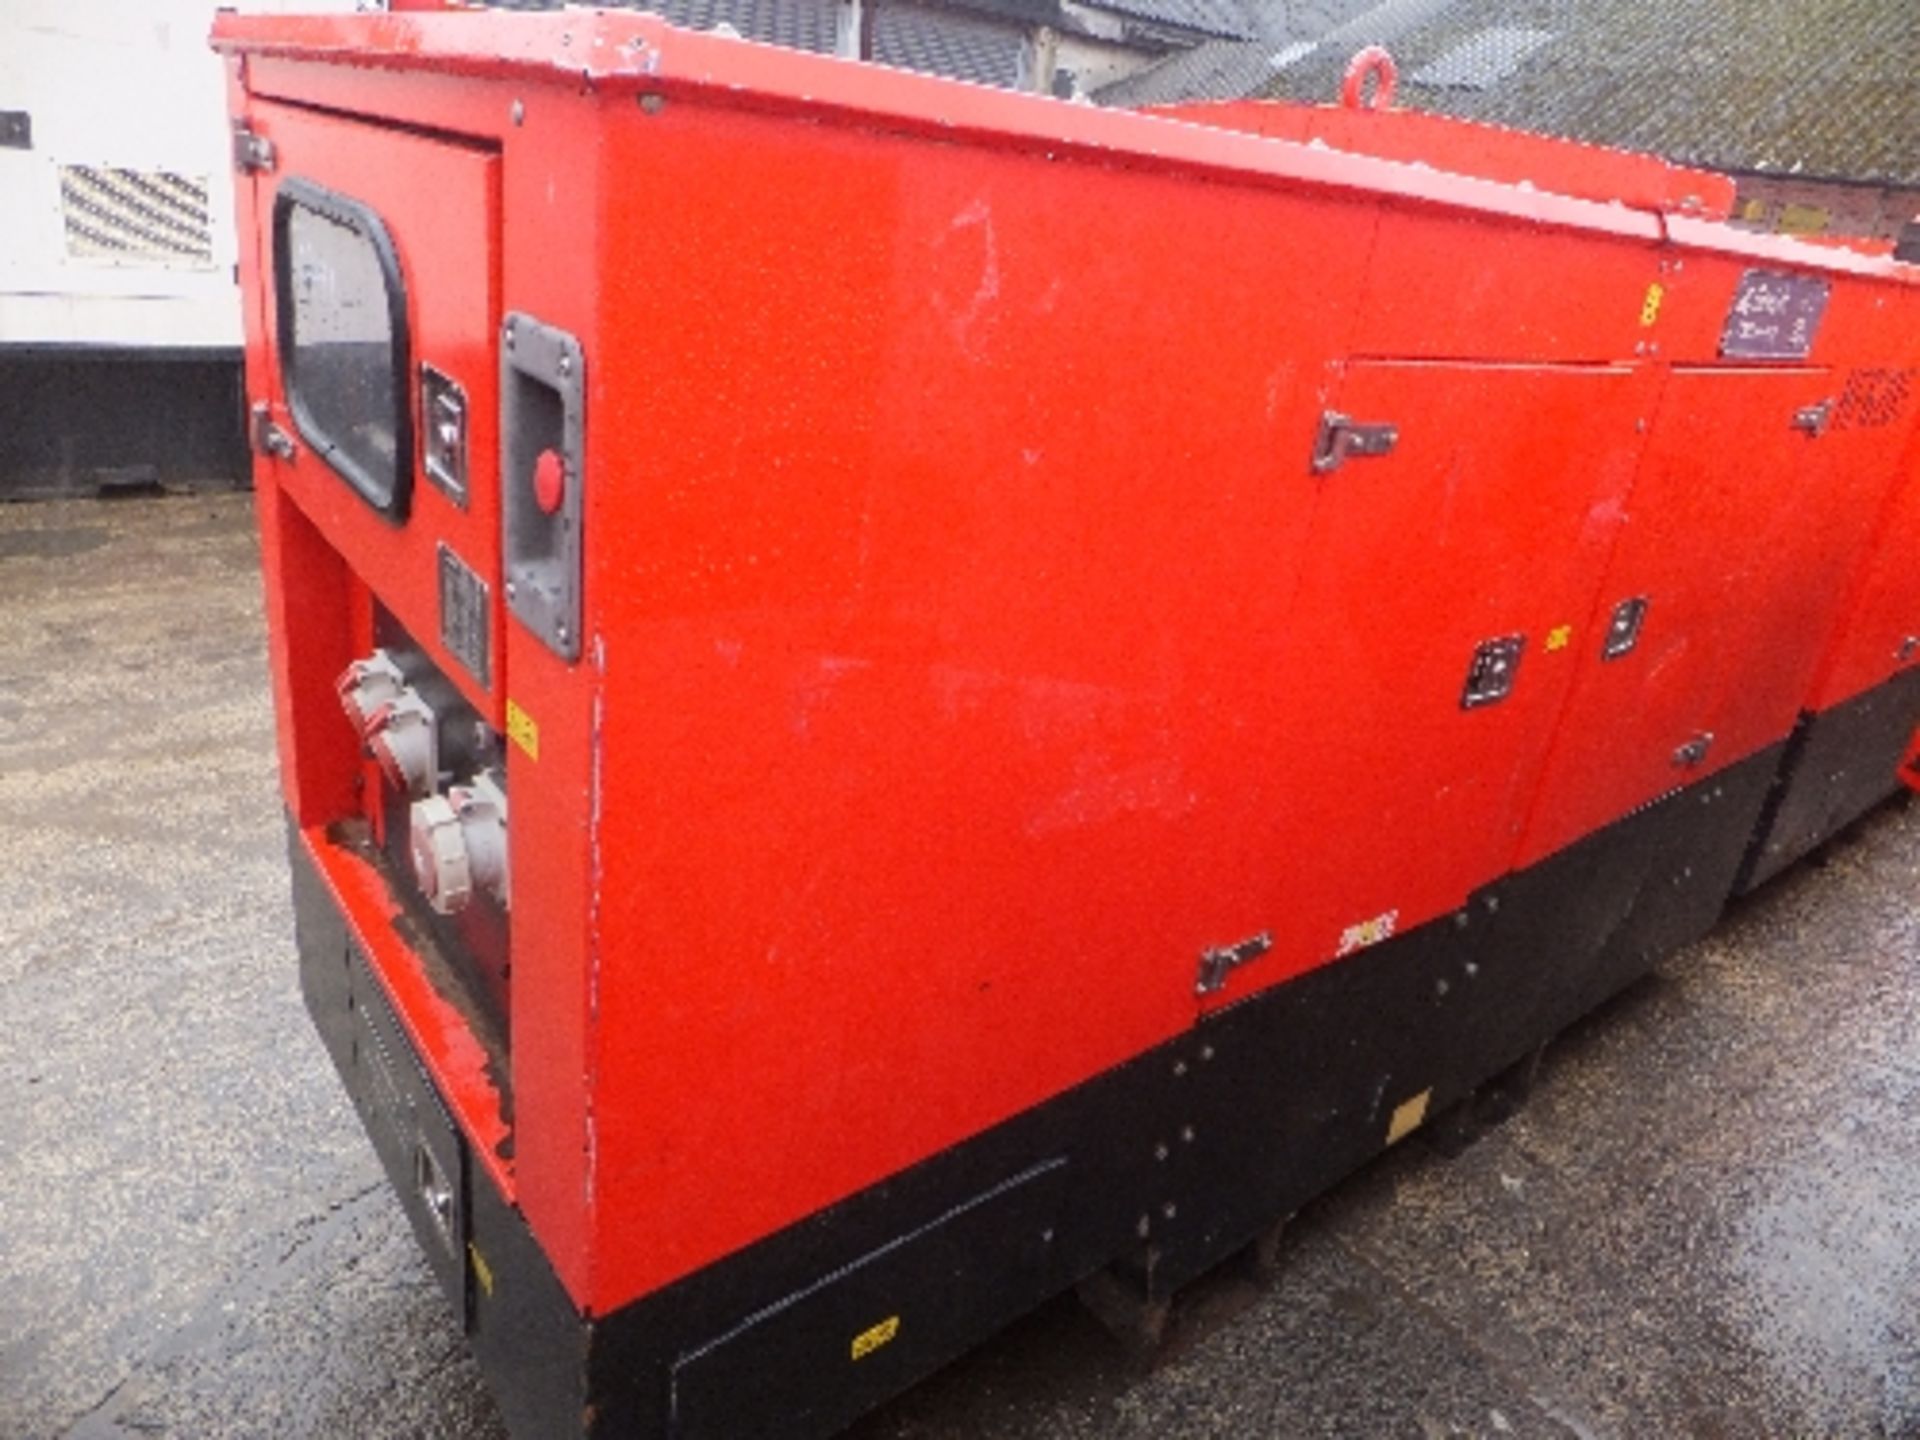 Genset MG50SSP generator 15838 hrs - fuel leak This lot is sold on instruction of Speedy